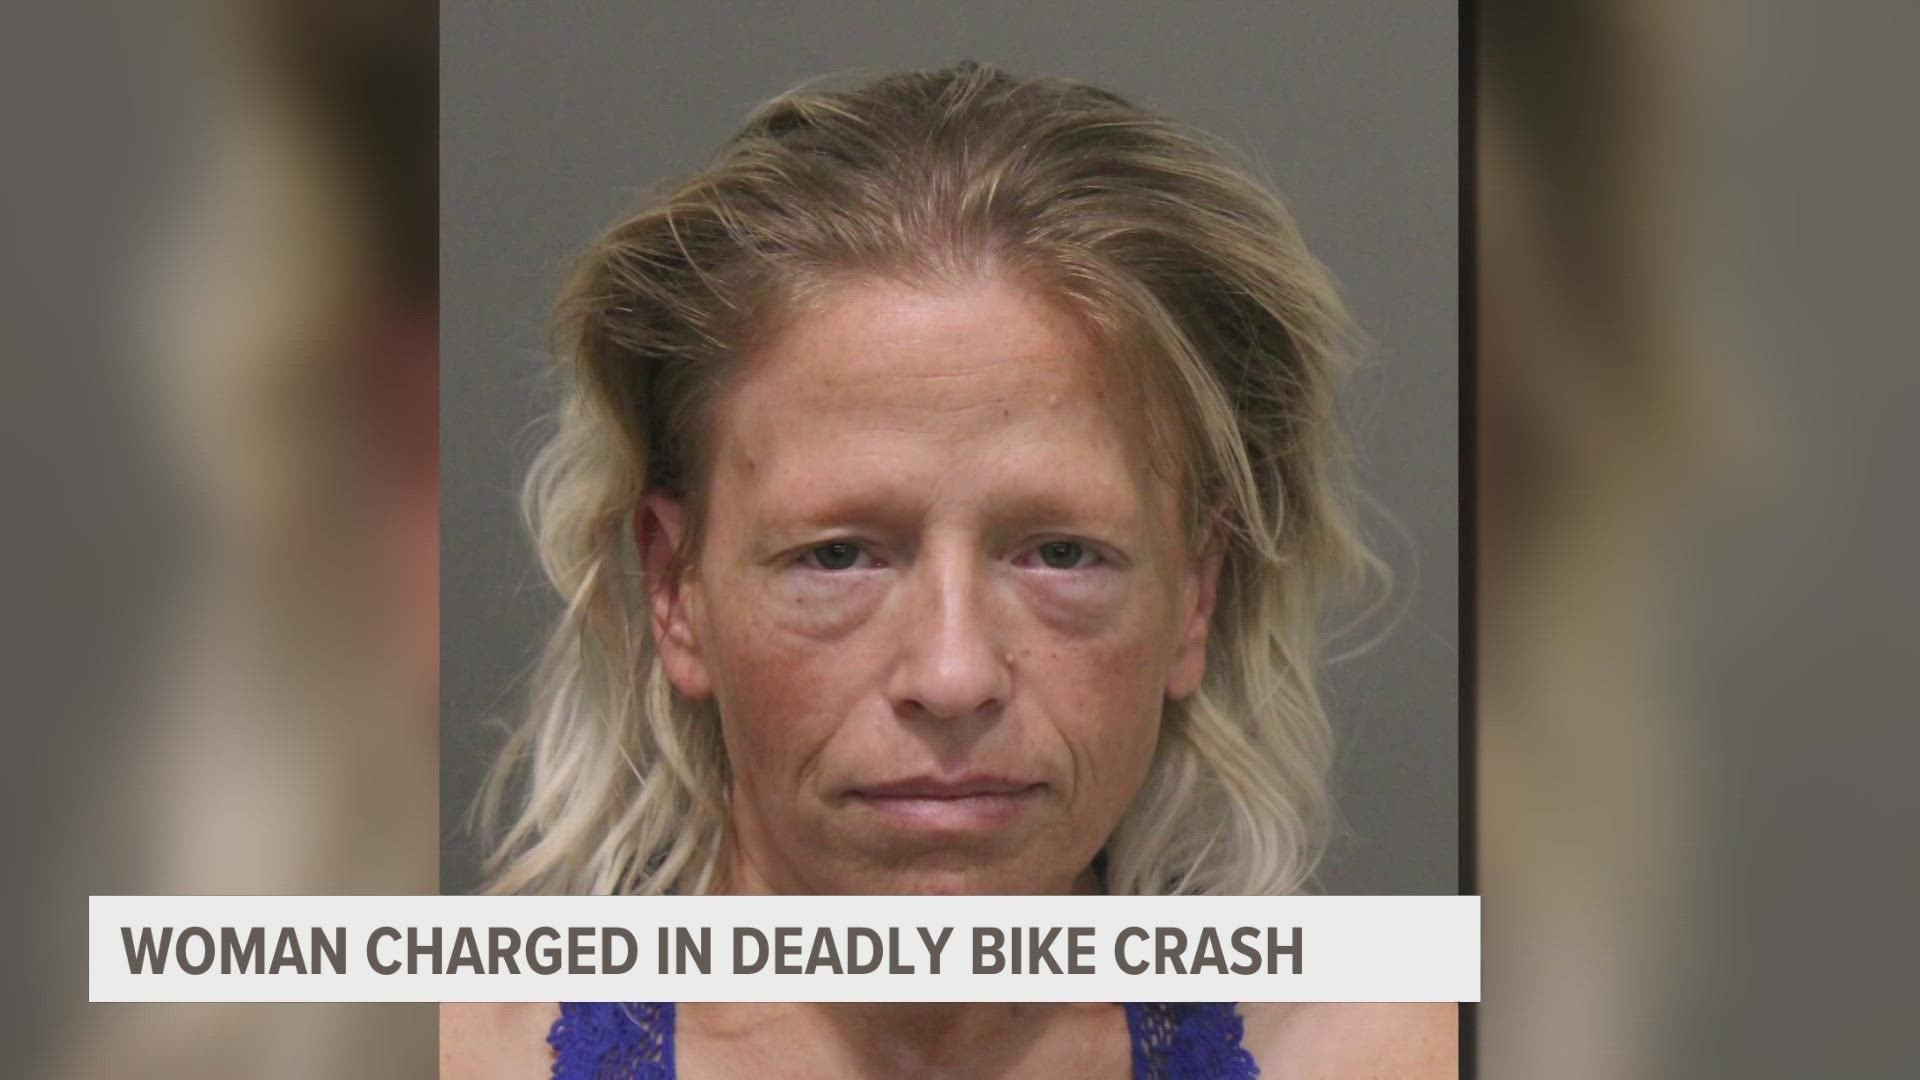 An Ionia County woman is facing serious charges in a crash that killed two bicyclists and critically injured three others.